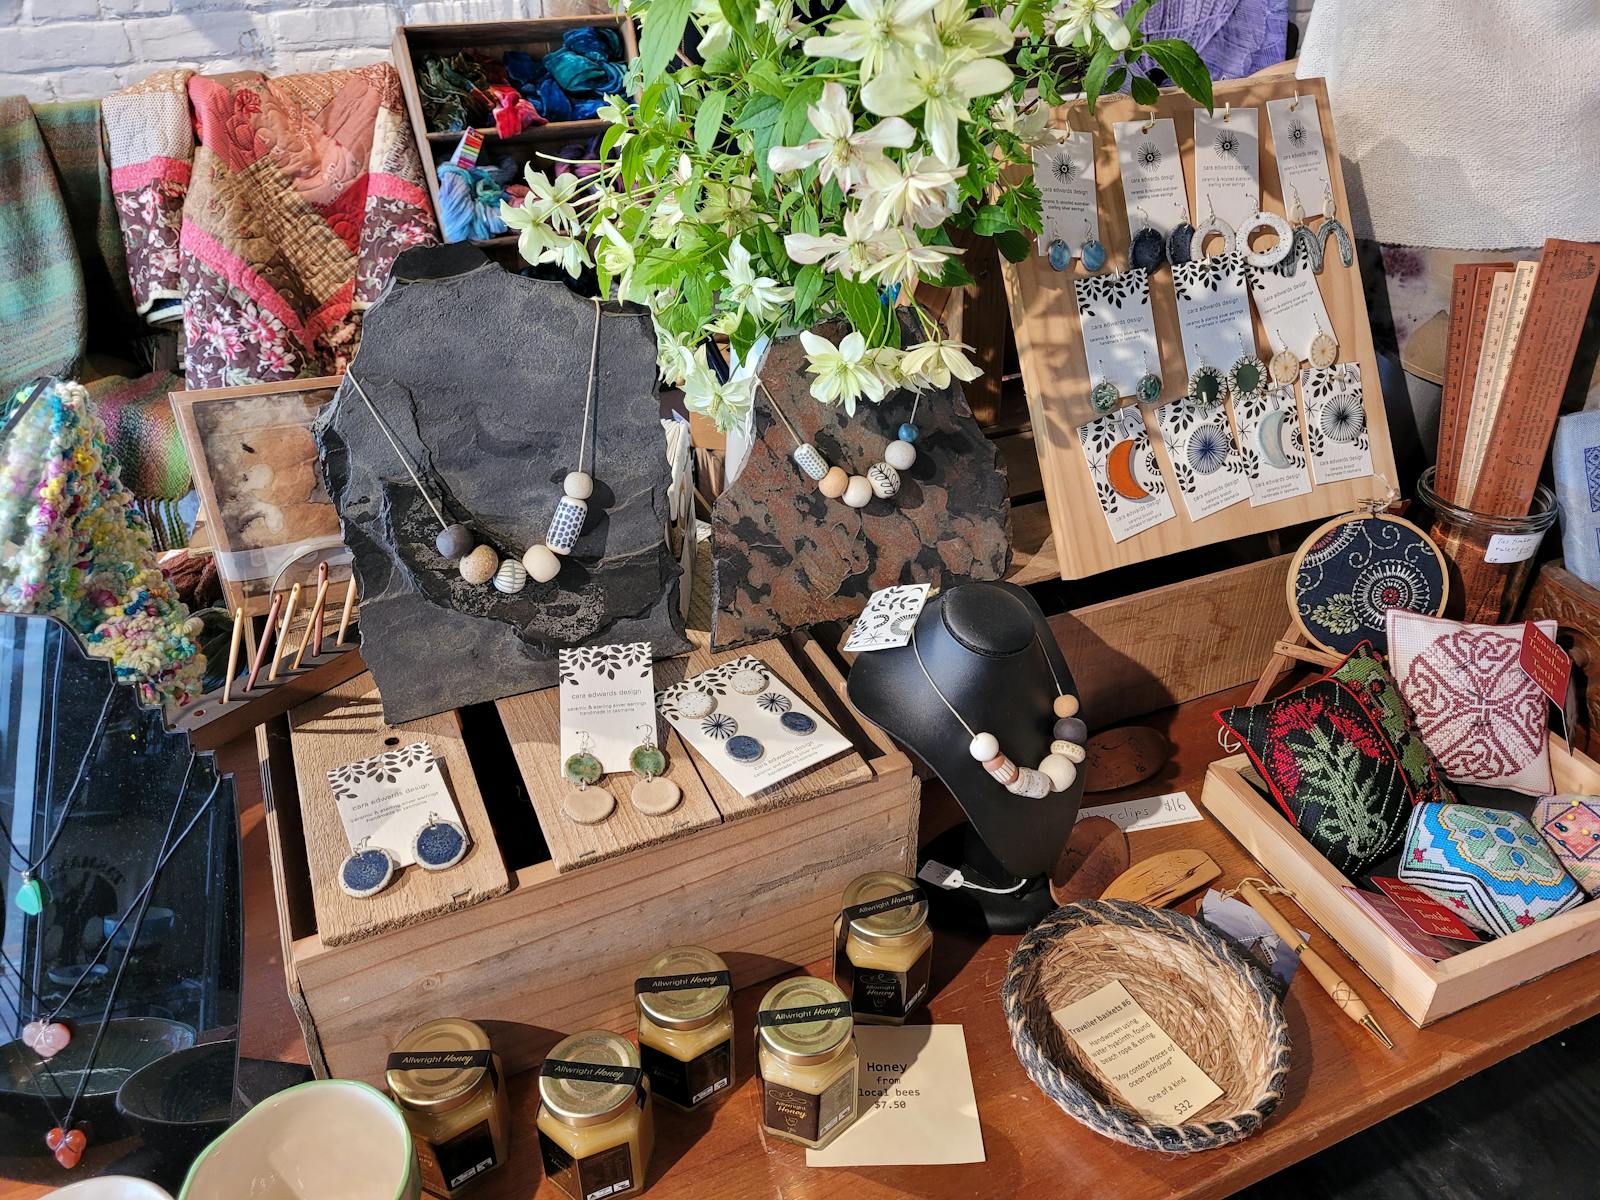 A display of ceramic jewellery, woven baskets, jars of honey and stitched pin cushions on a table.